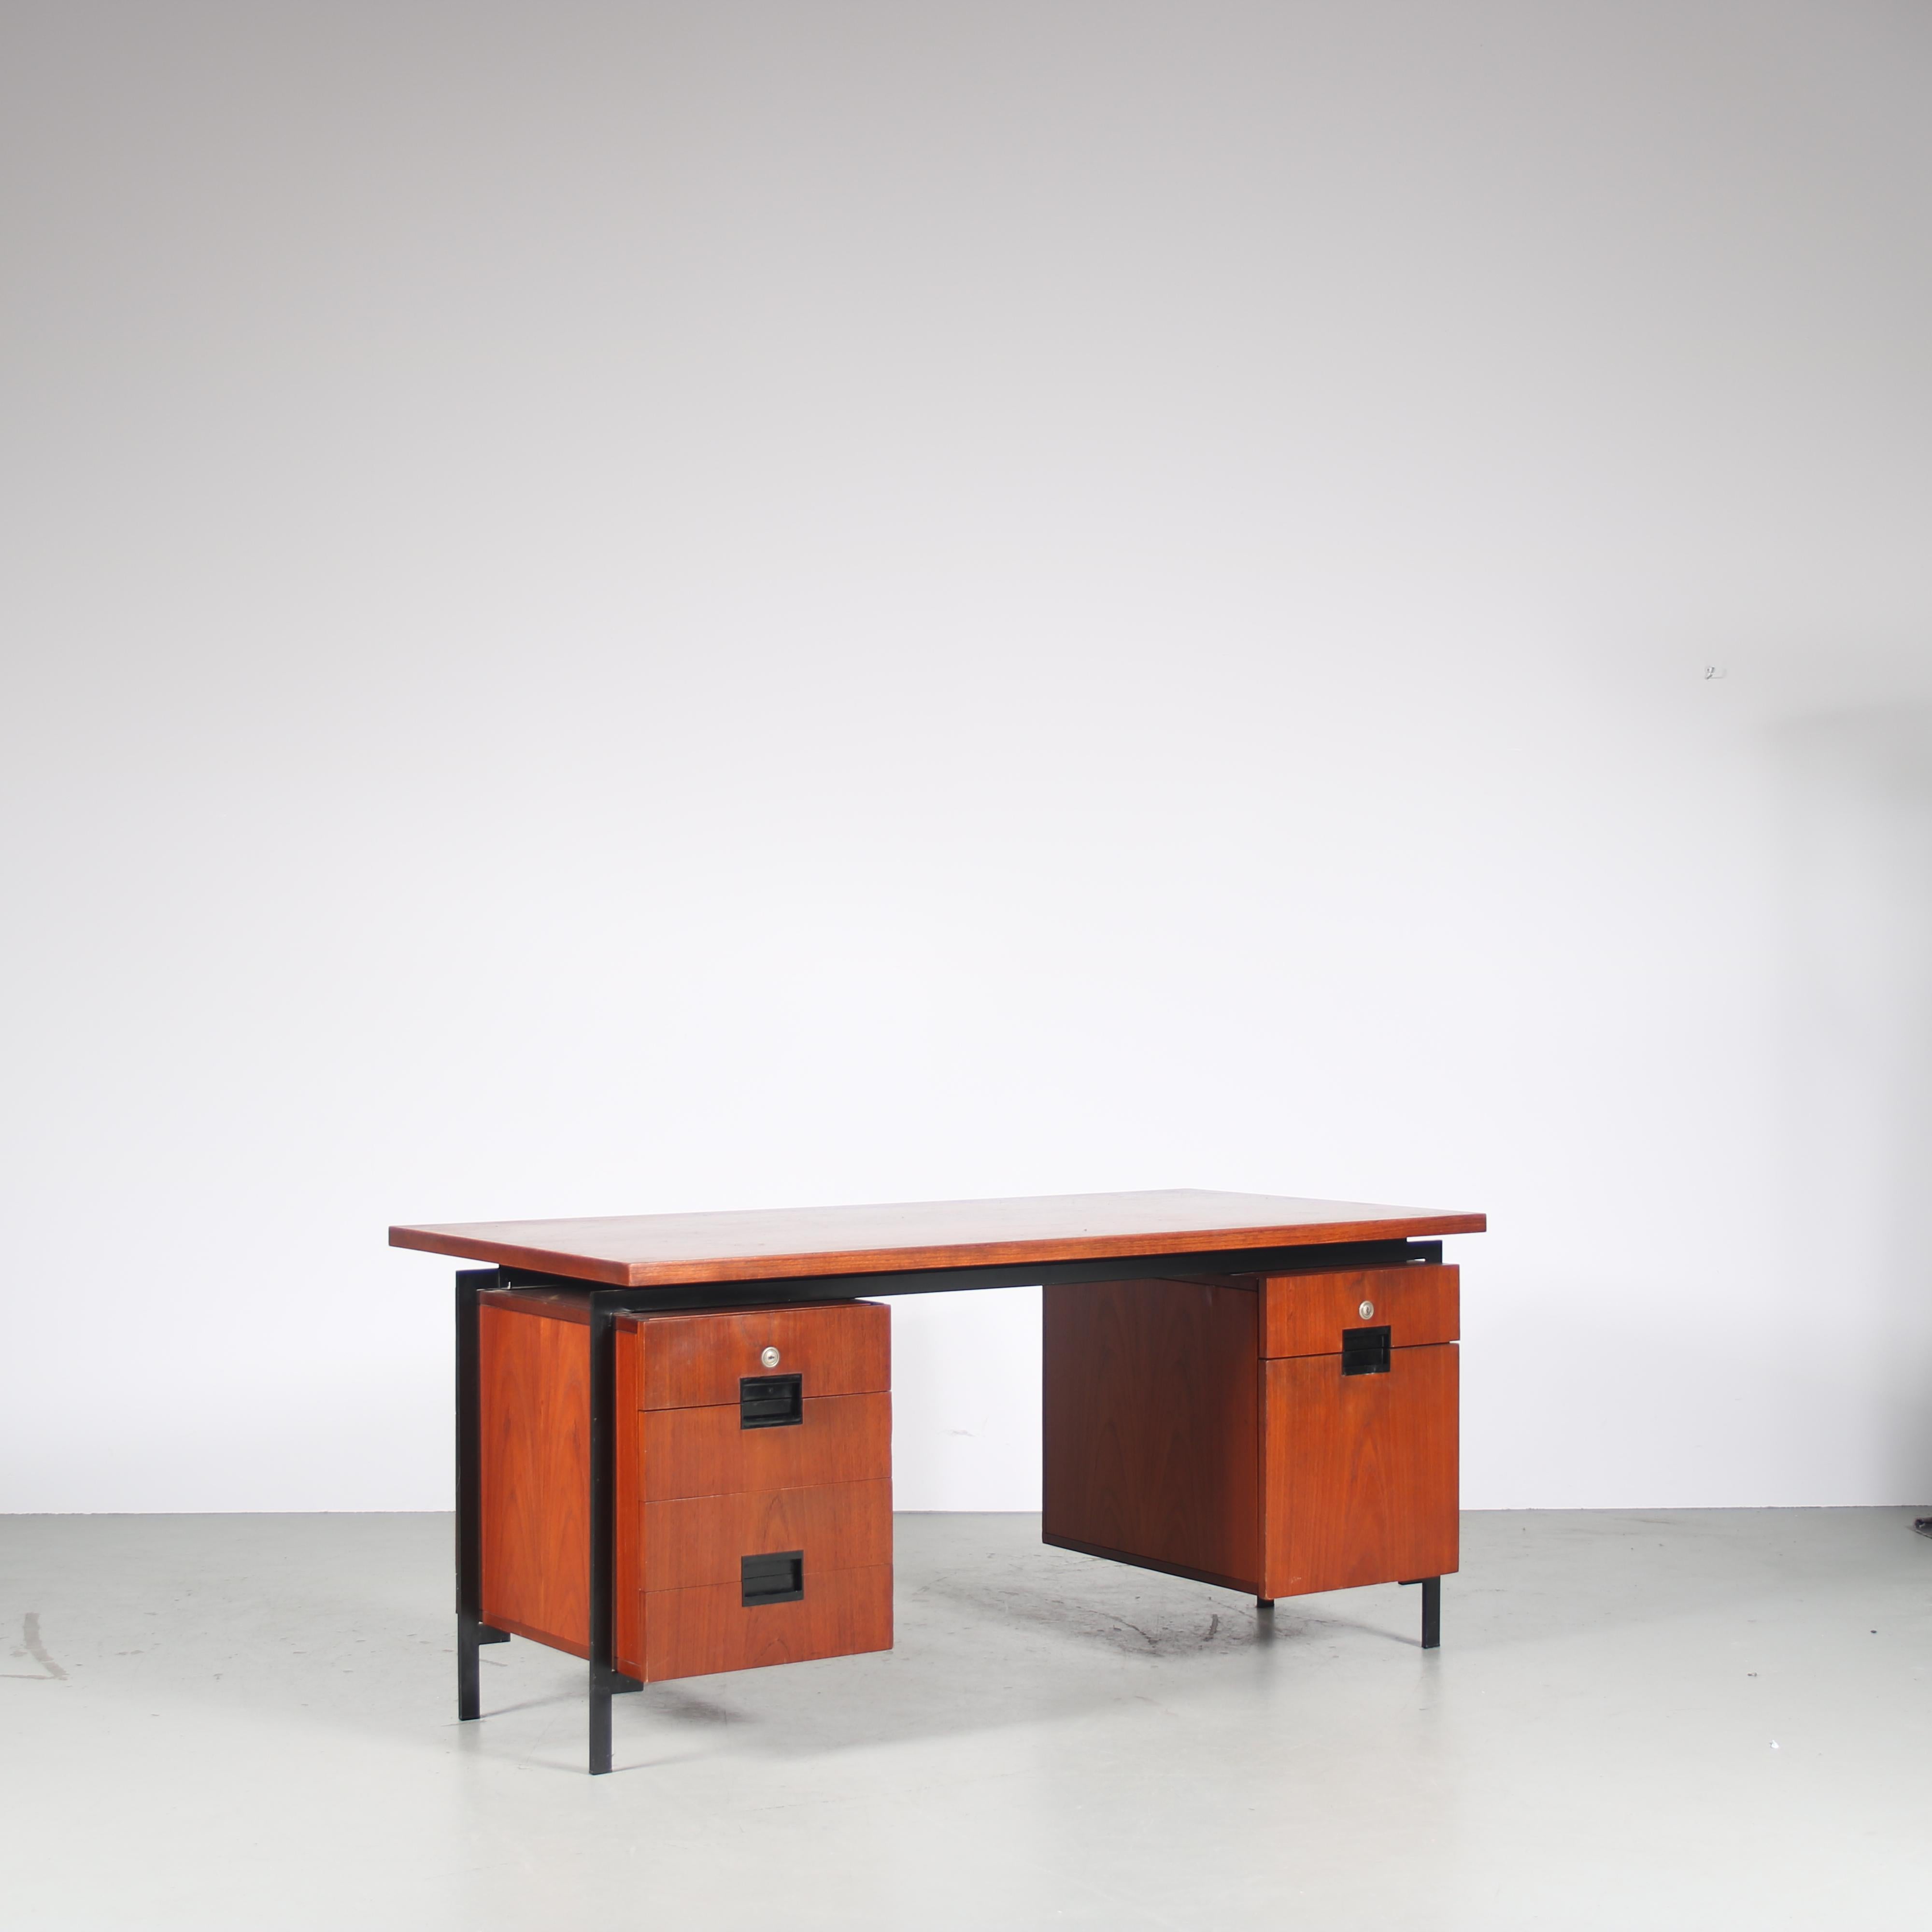 A beautiful Dutch design desk from the highly wanted Japanese Series designed by Cees Braakman, manufactured by Pastoe in the Netherlands, circa 1960.

This stunning desk is made of the highest quality teak wood on a black lacquered metal base. The